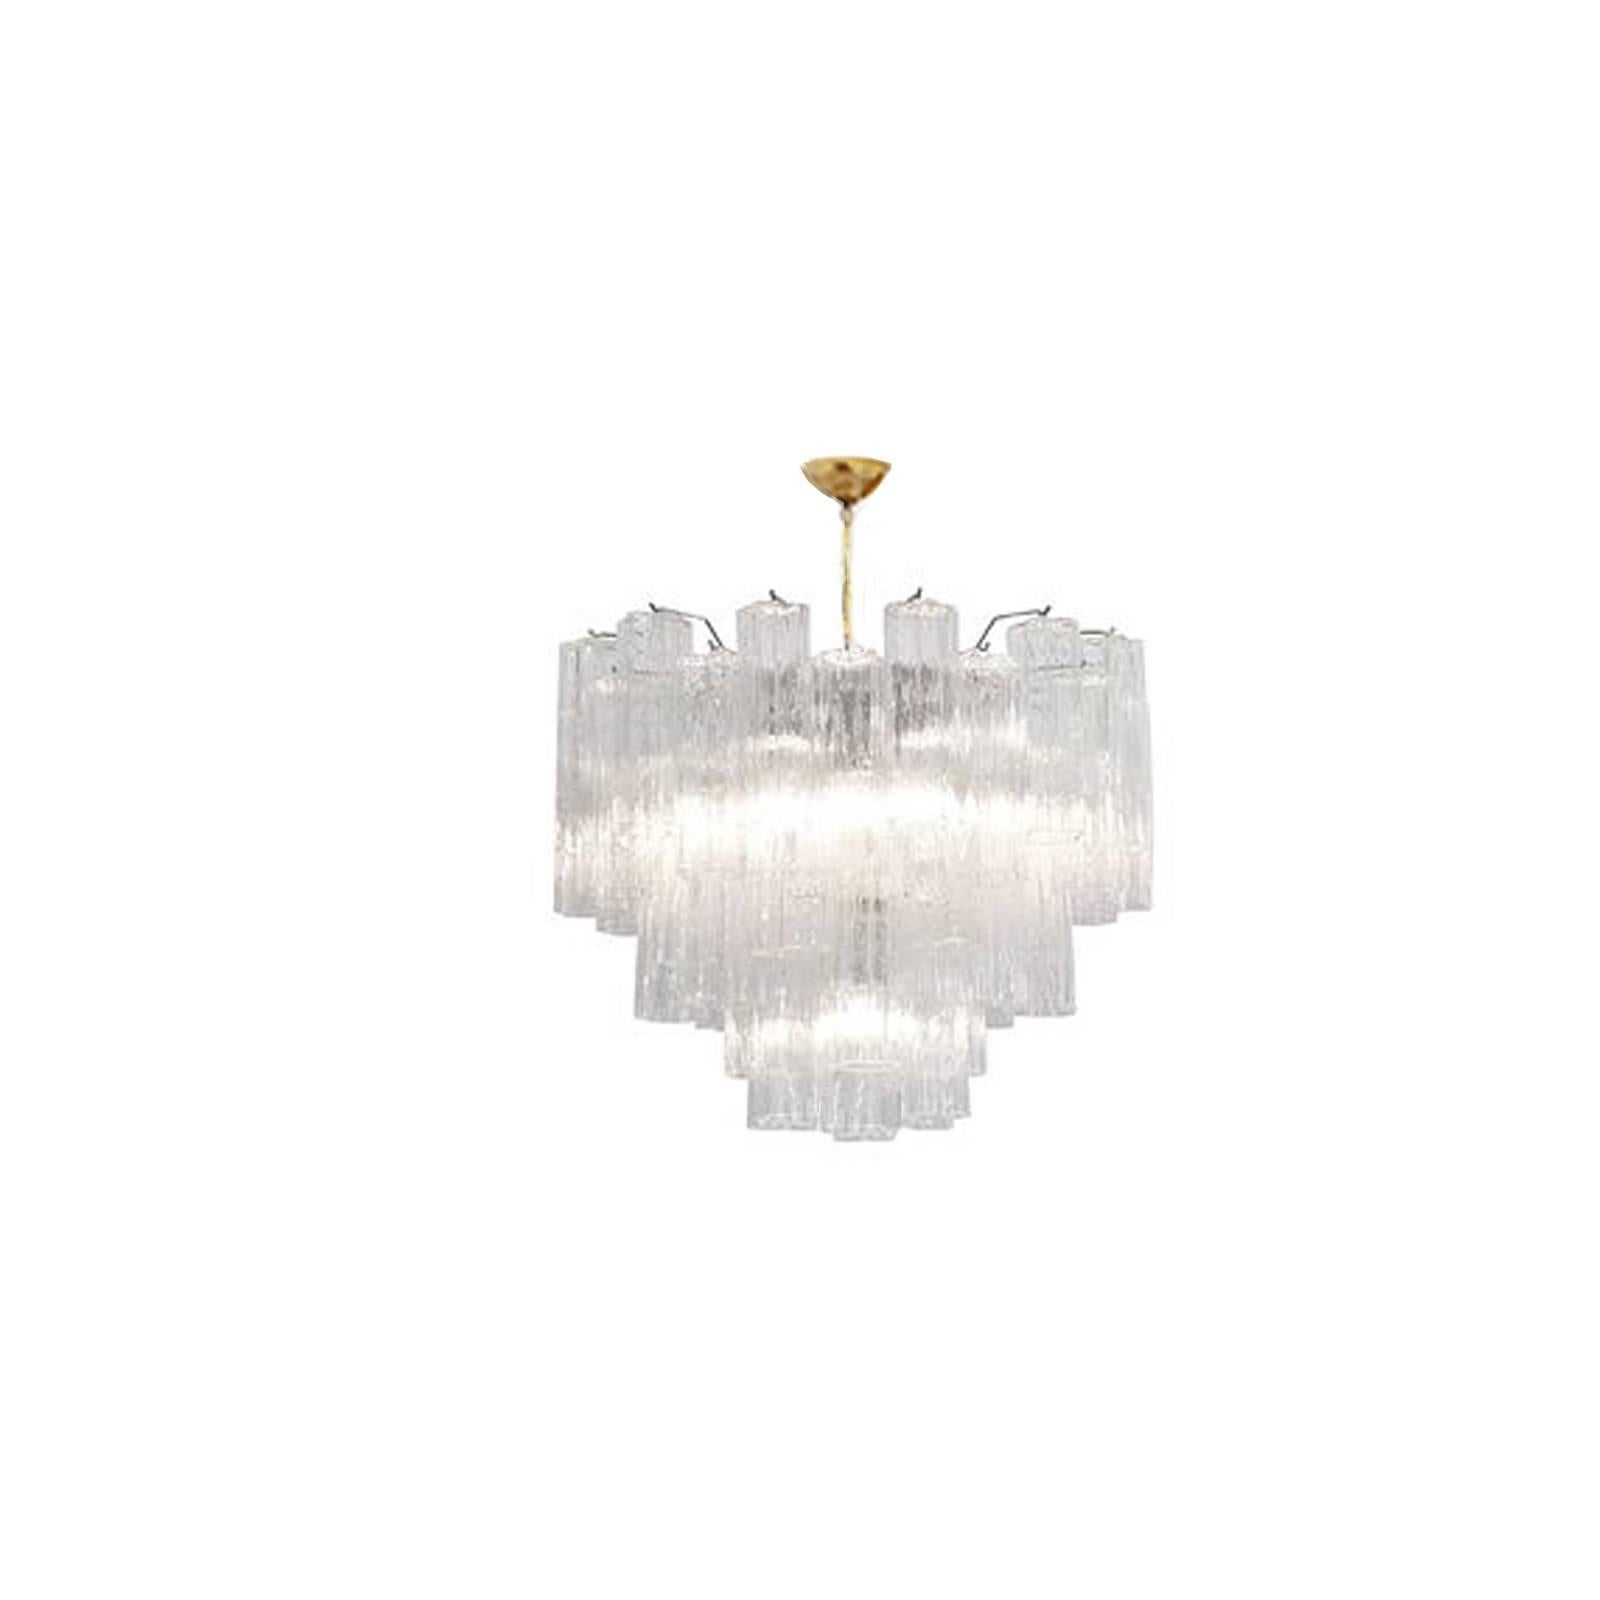 Stunning chandelier composed by a total of 48 tronchi glass prisms on a brass frame: 8 on the bottom row, 16 on center and 24 on the top row. 
The tronchi glass tubes are textured and scalloped, each measuring 10 1/8